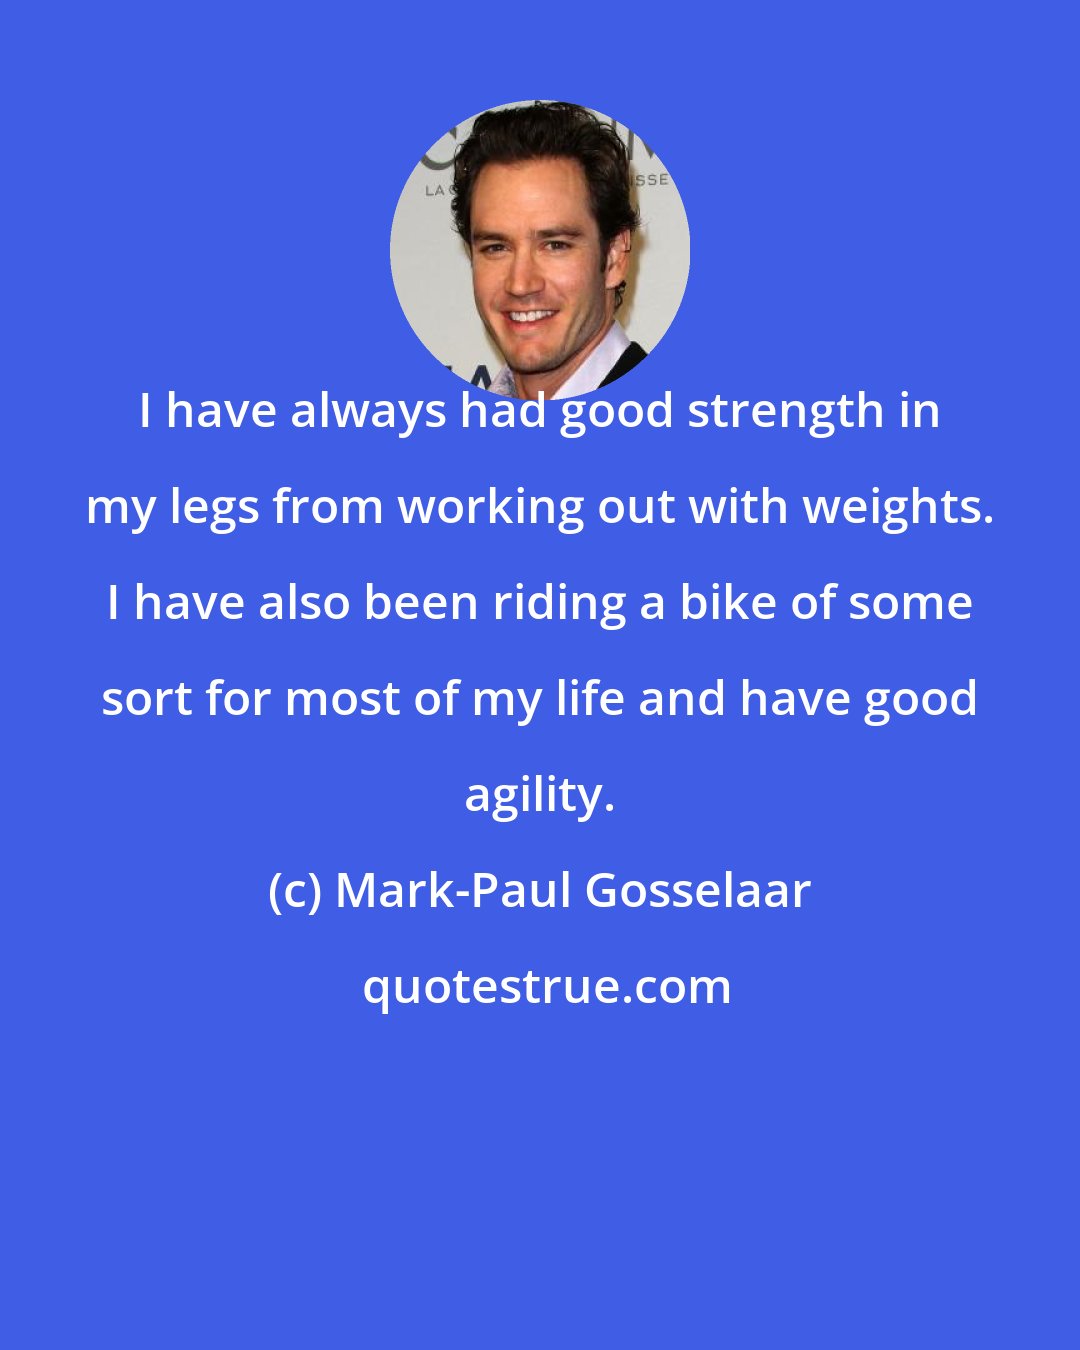 Mark-Paul Gosselaar: I have always had good strength in my legs from working out with weights. I have also been riding a bike of some sort for most of my life and have good agility.